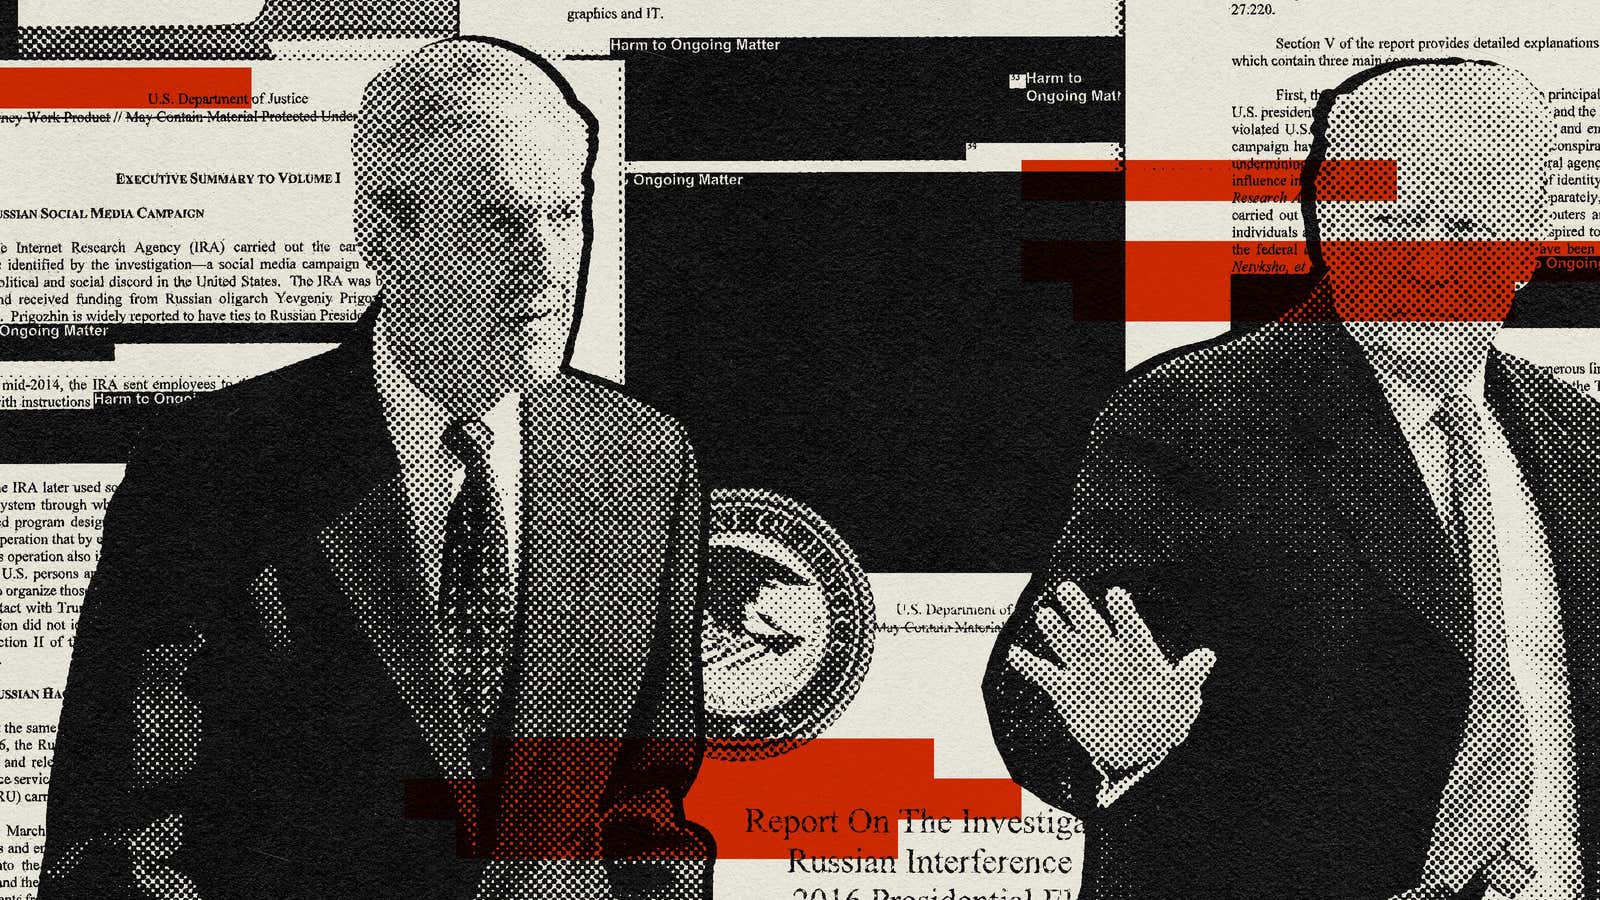 Here’s a version of the Mueller report that you can actually search